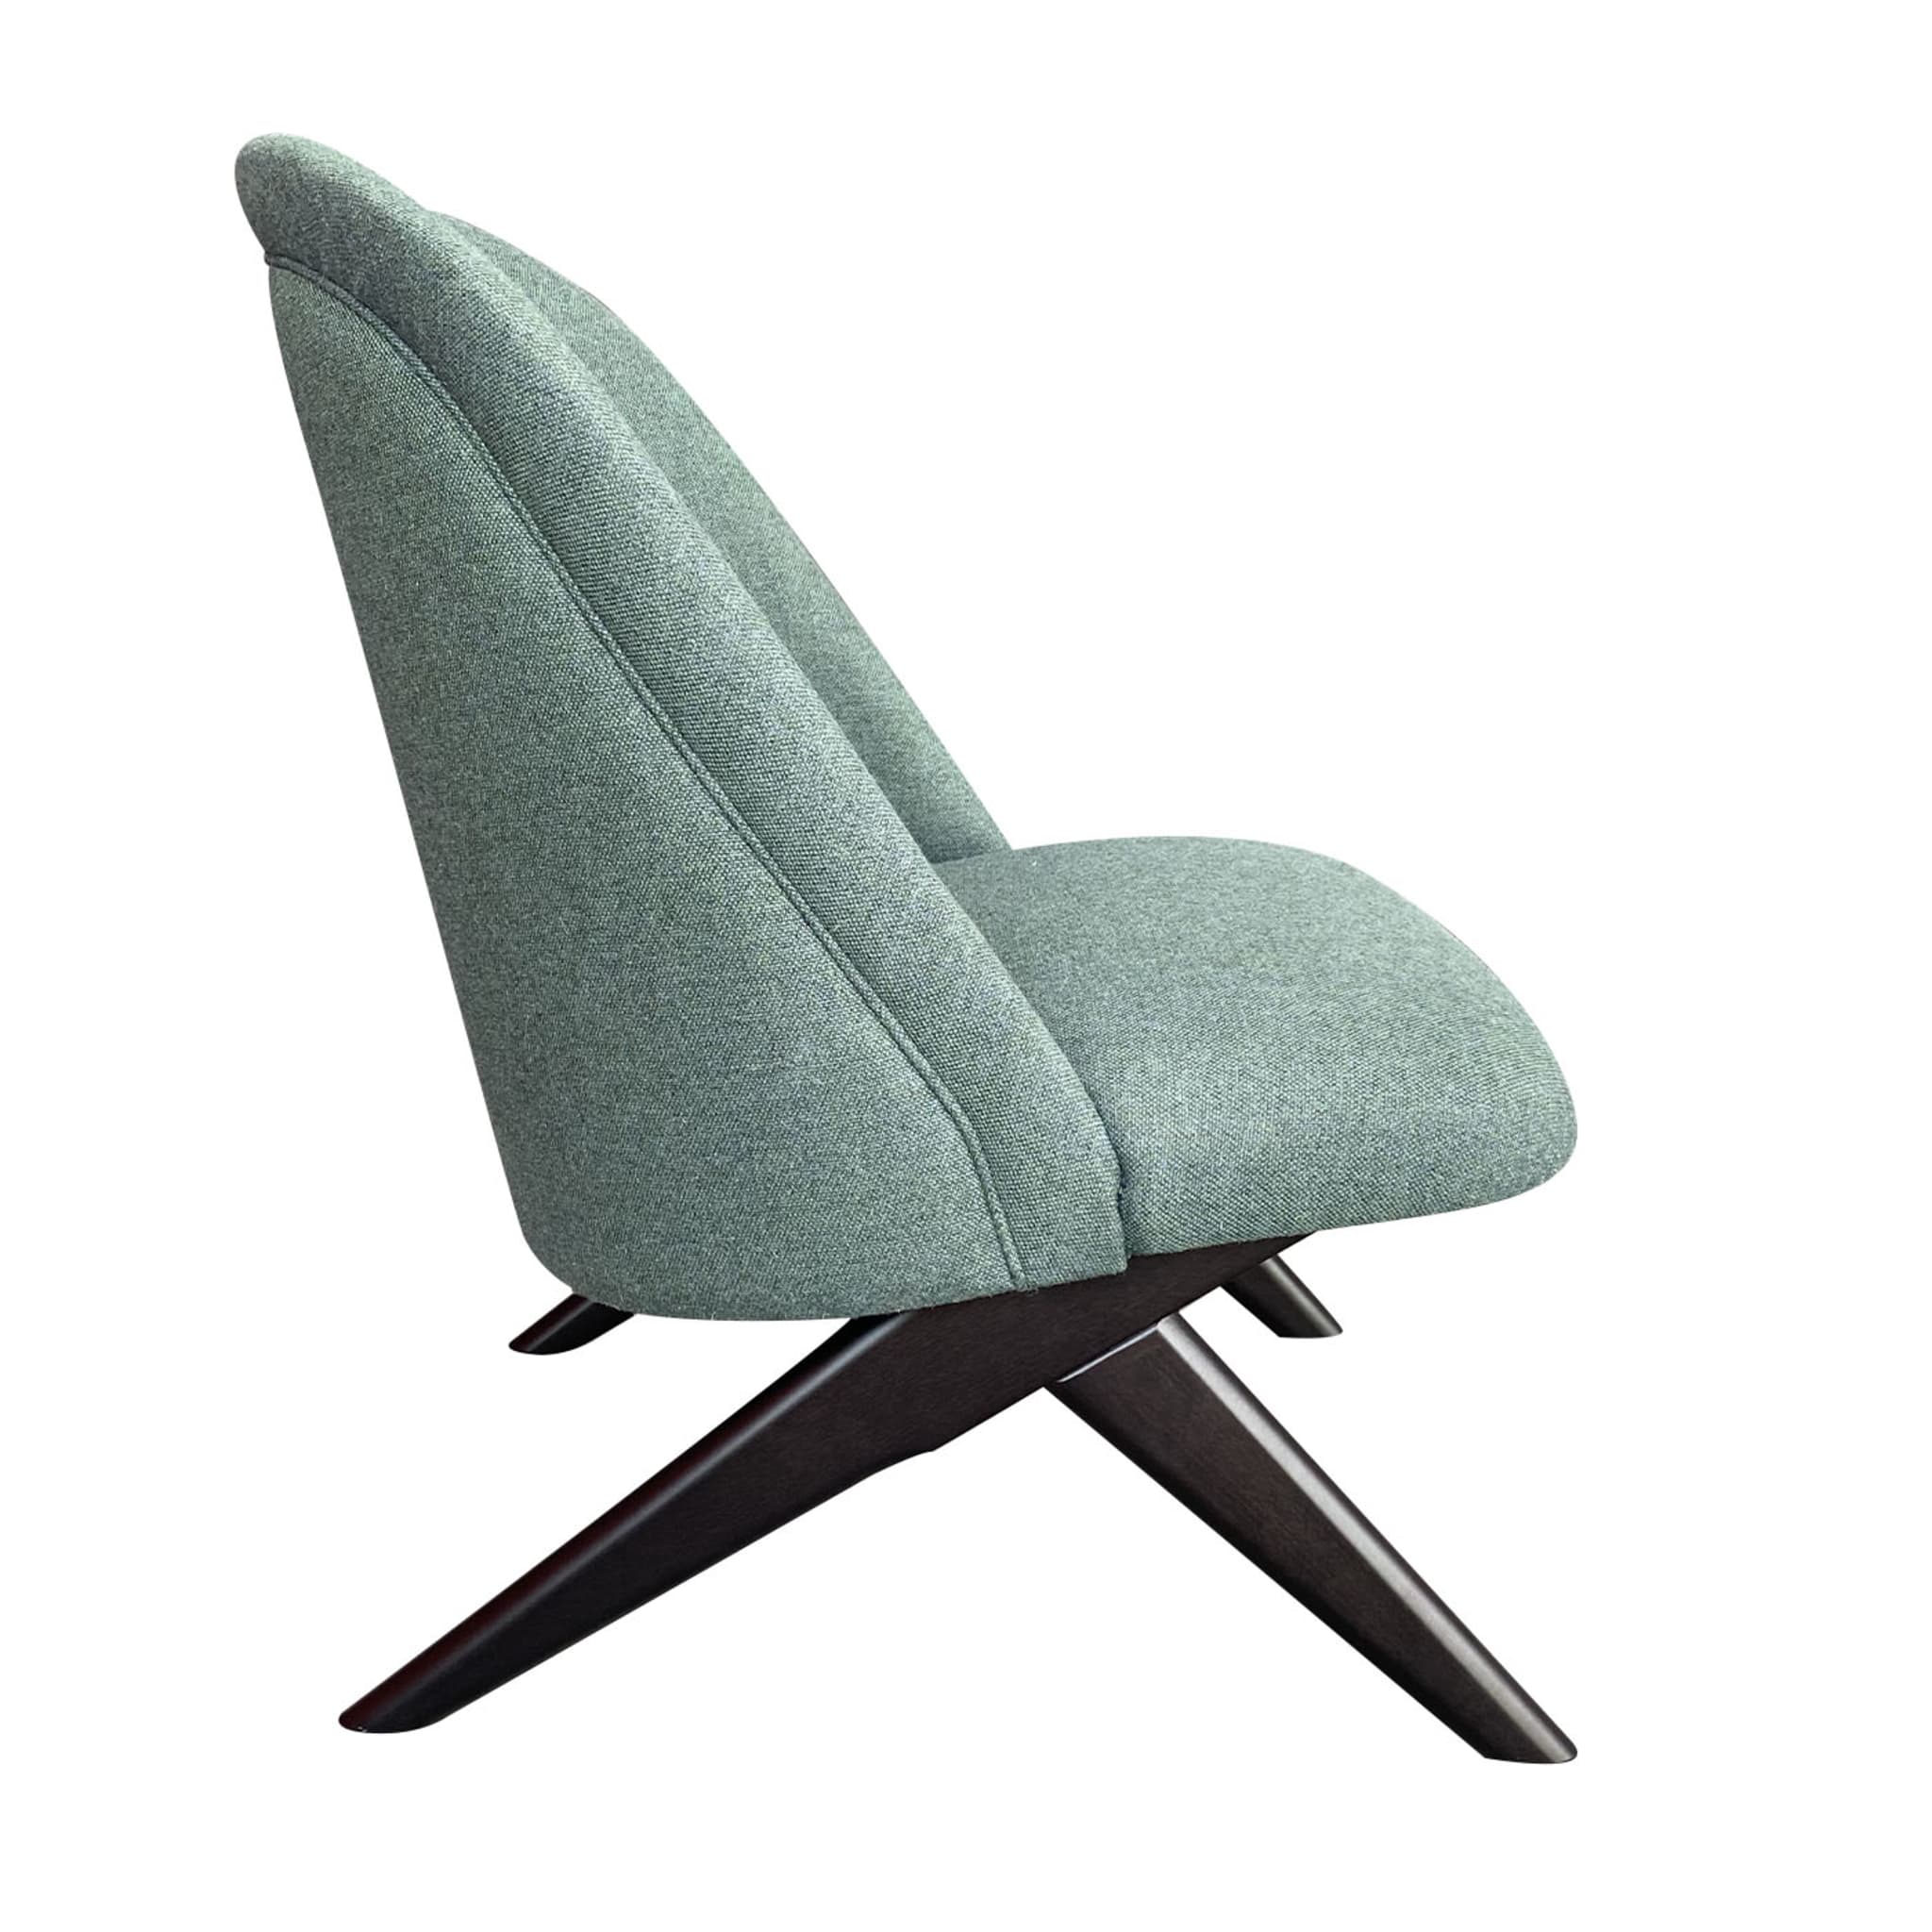 Macao Greenford Lounge Chair - Alternative view 3